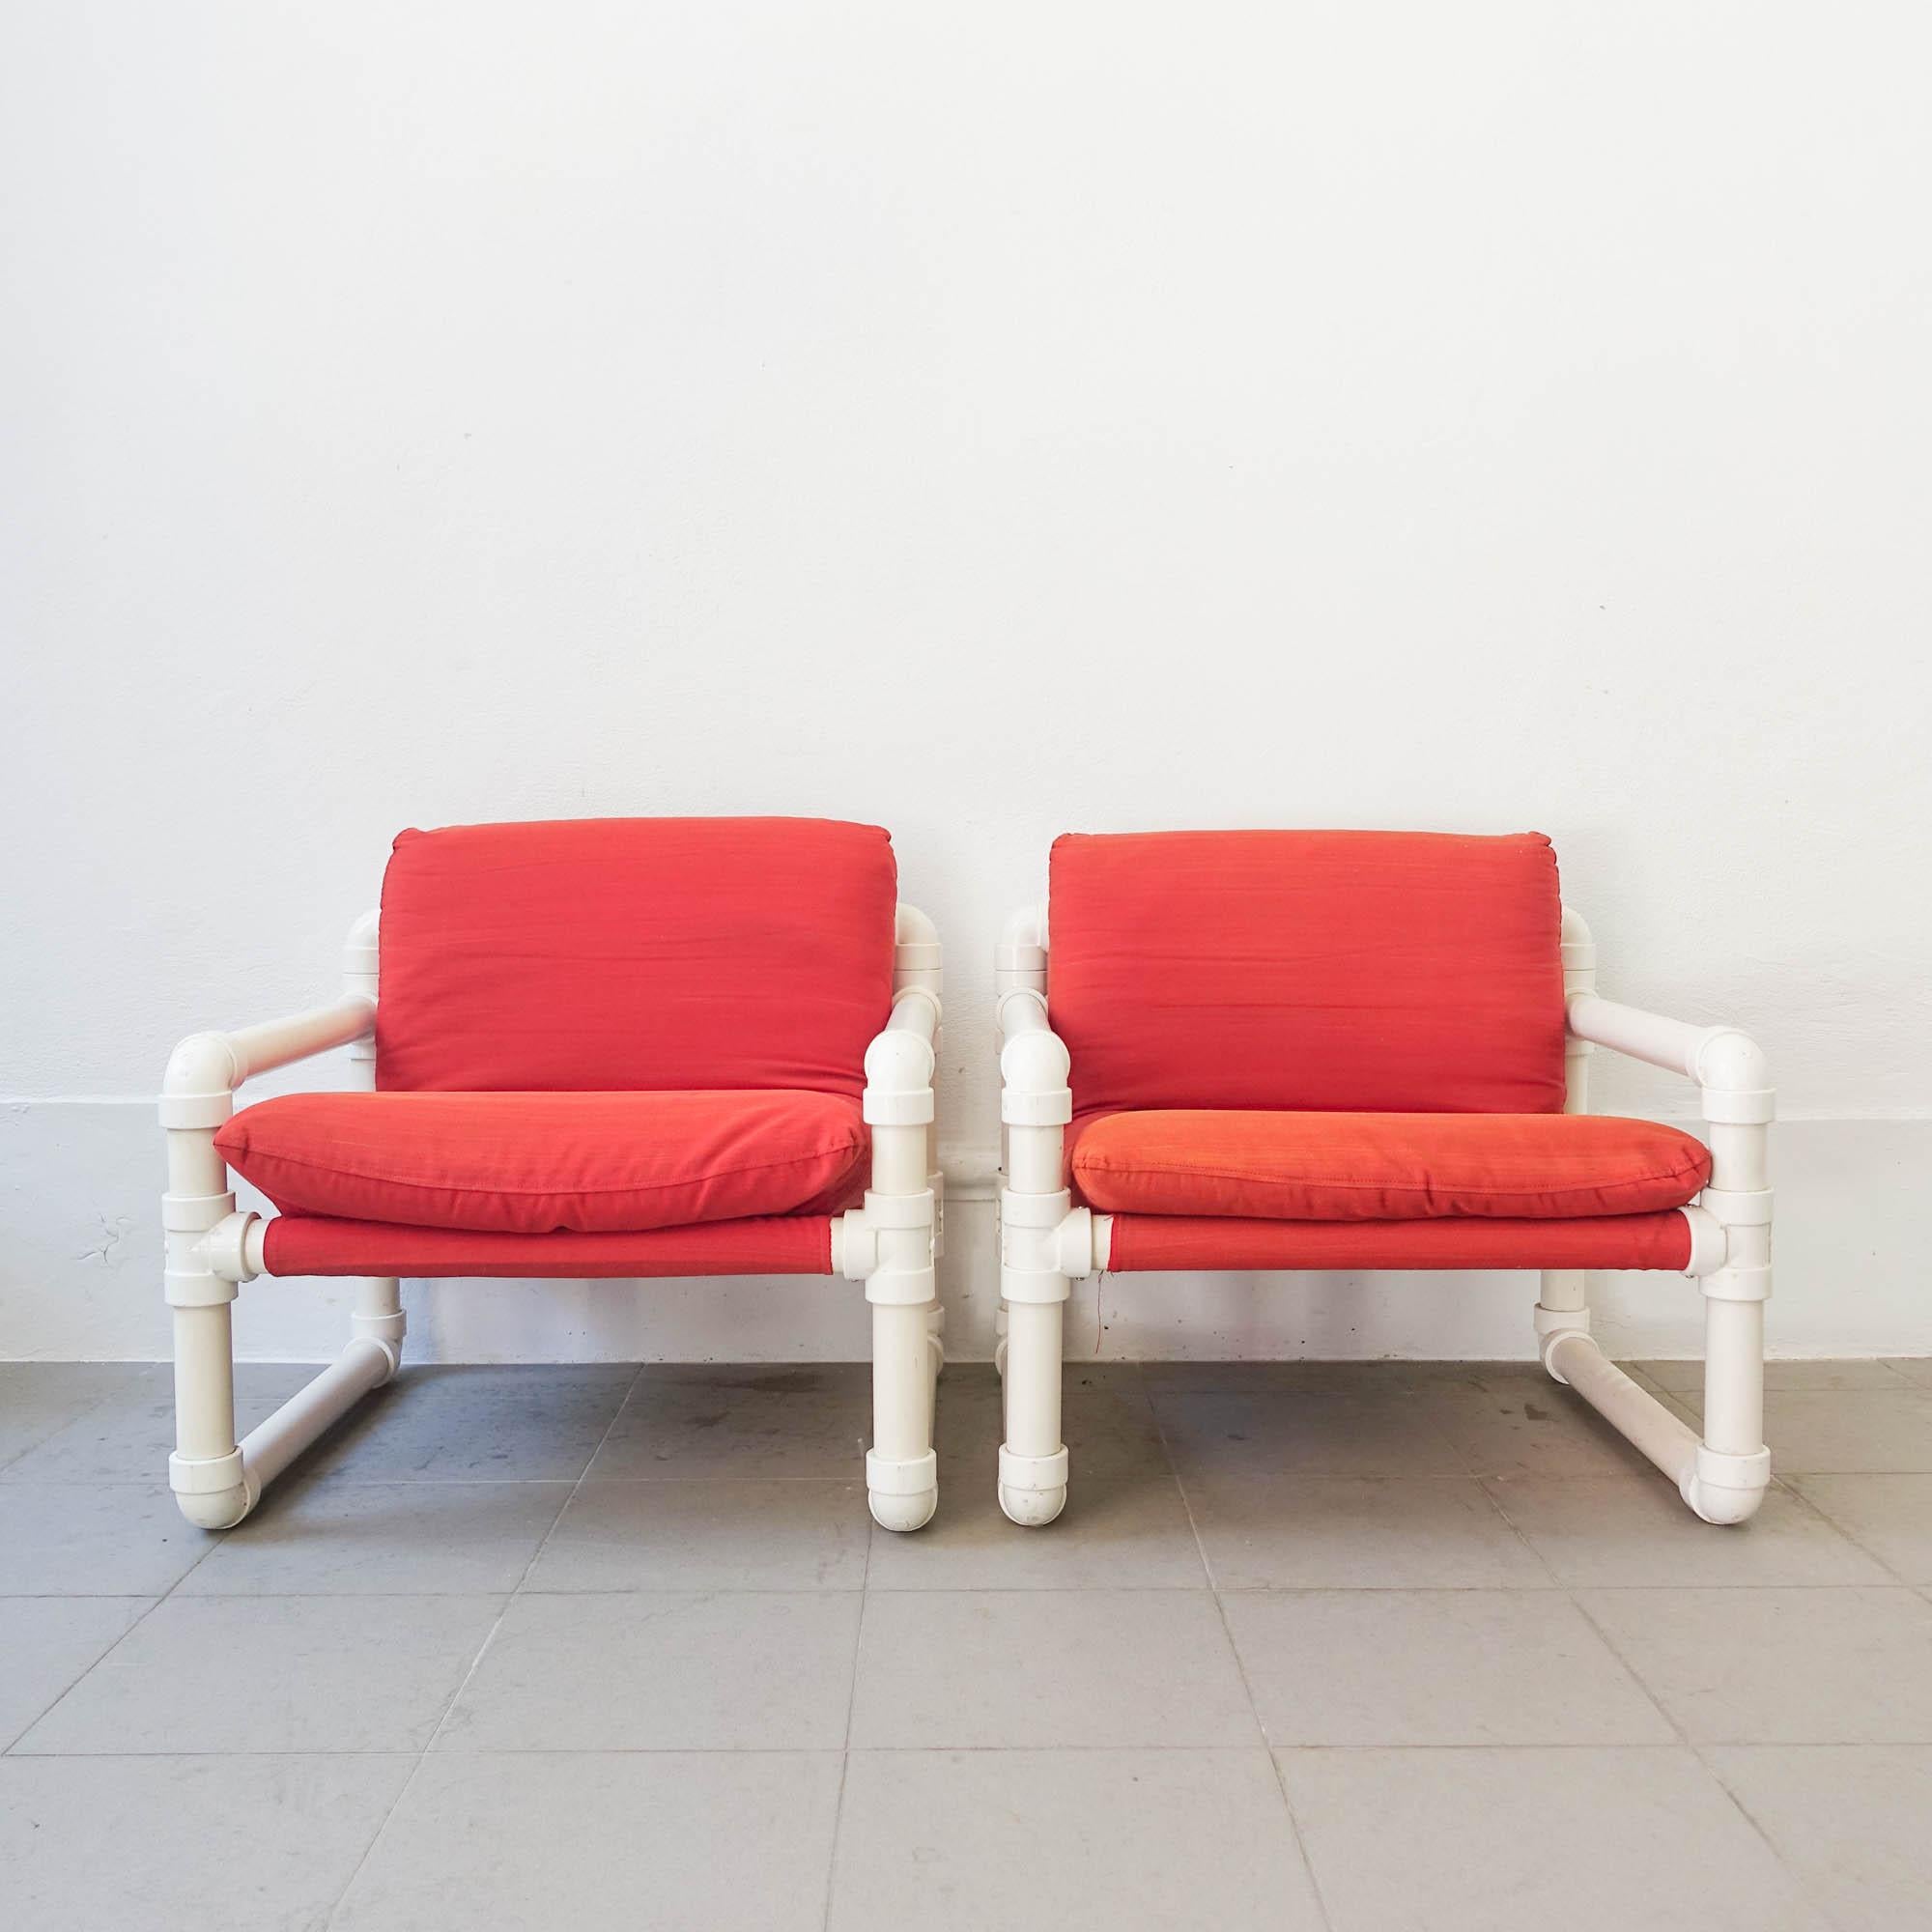 This pair of armchairs, model Tub-Kit, was designed by João Américo Pinto de Oliveira for Altamira and Plimat - Marinha Grande, in Portugal in 1984. It is a unique design were the structure in made of plastic tubes. The seat and back is a continuous